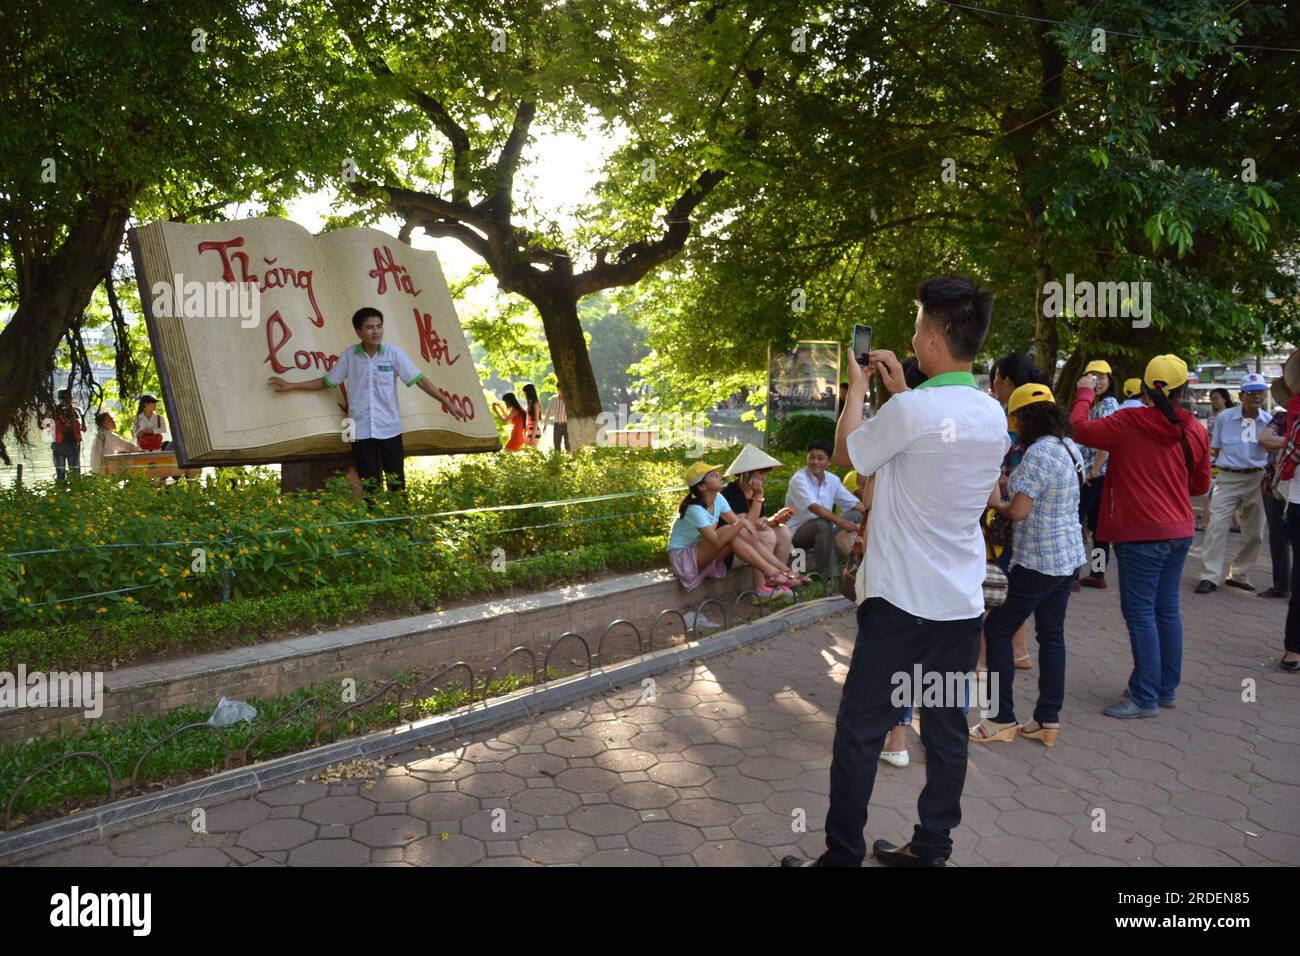 A young man takes a photo of a friend posing in front of the giant Open Book monument in Hoan Kiem Lake park in Hanoi, Vietnam, Asia; giant open book art sculpture celebrates 1000 or one thousand years of culture, founding of Hanoi Stock Photo